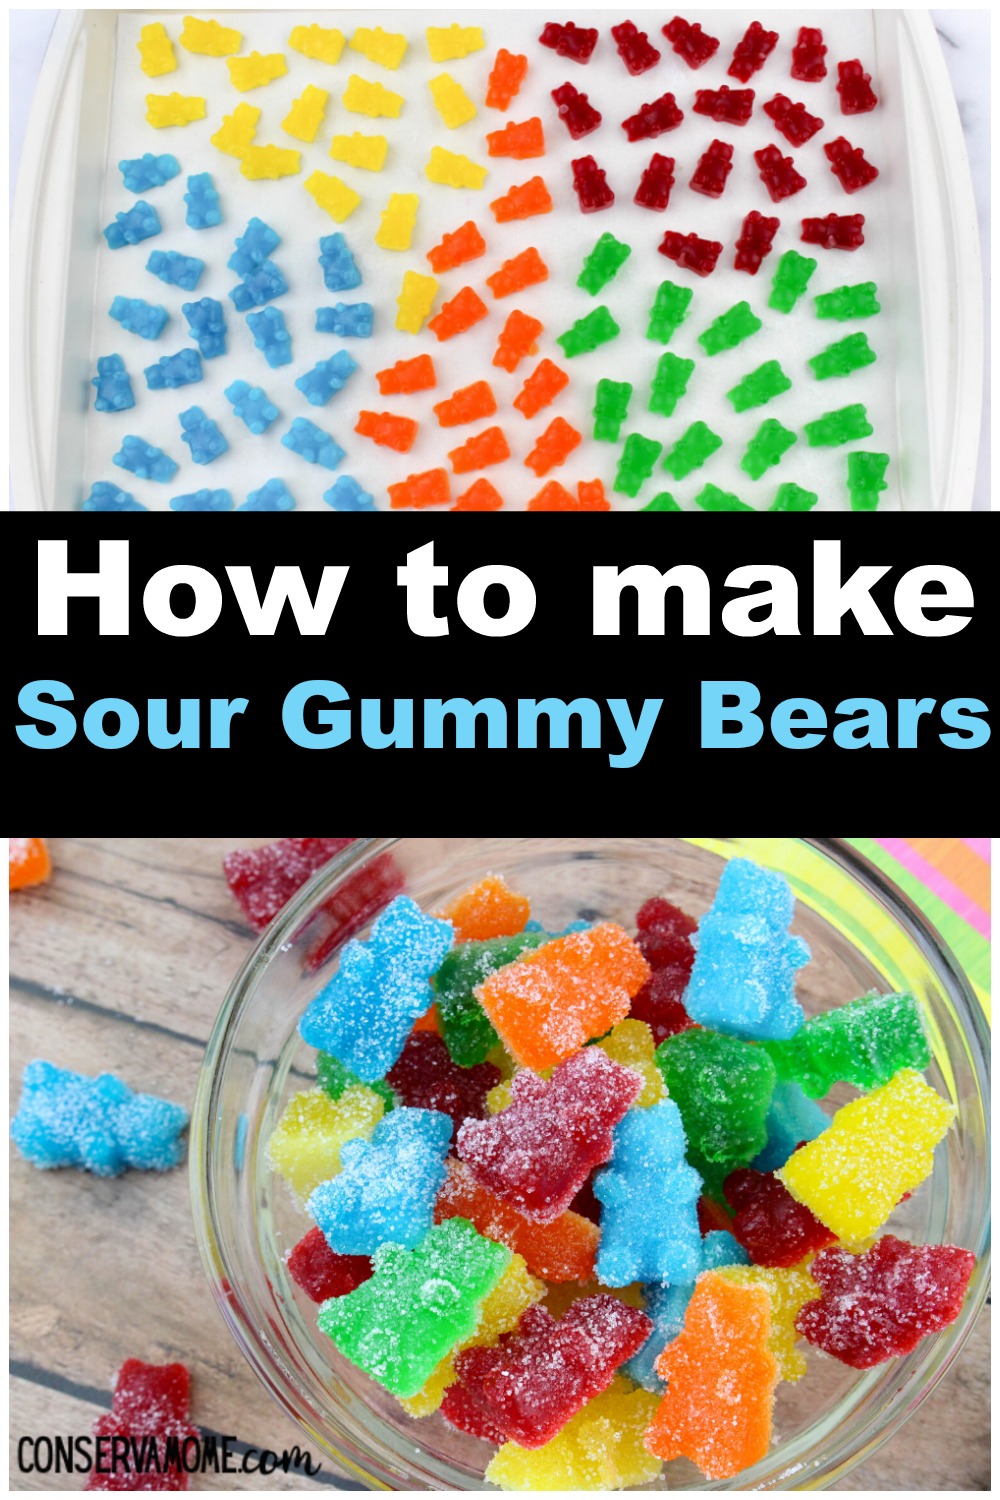 How to make sour gummy bears